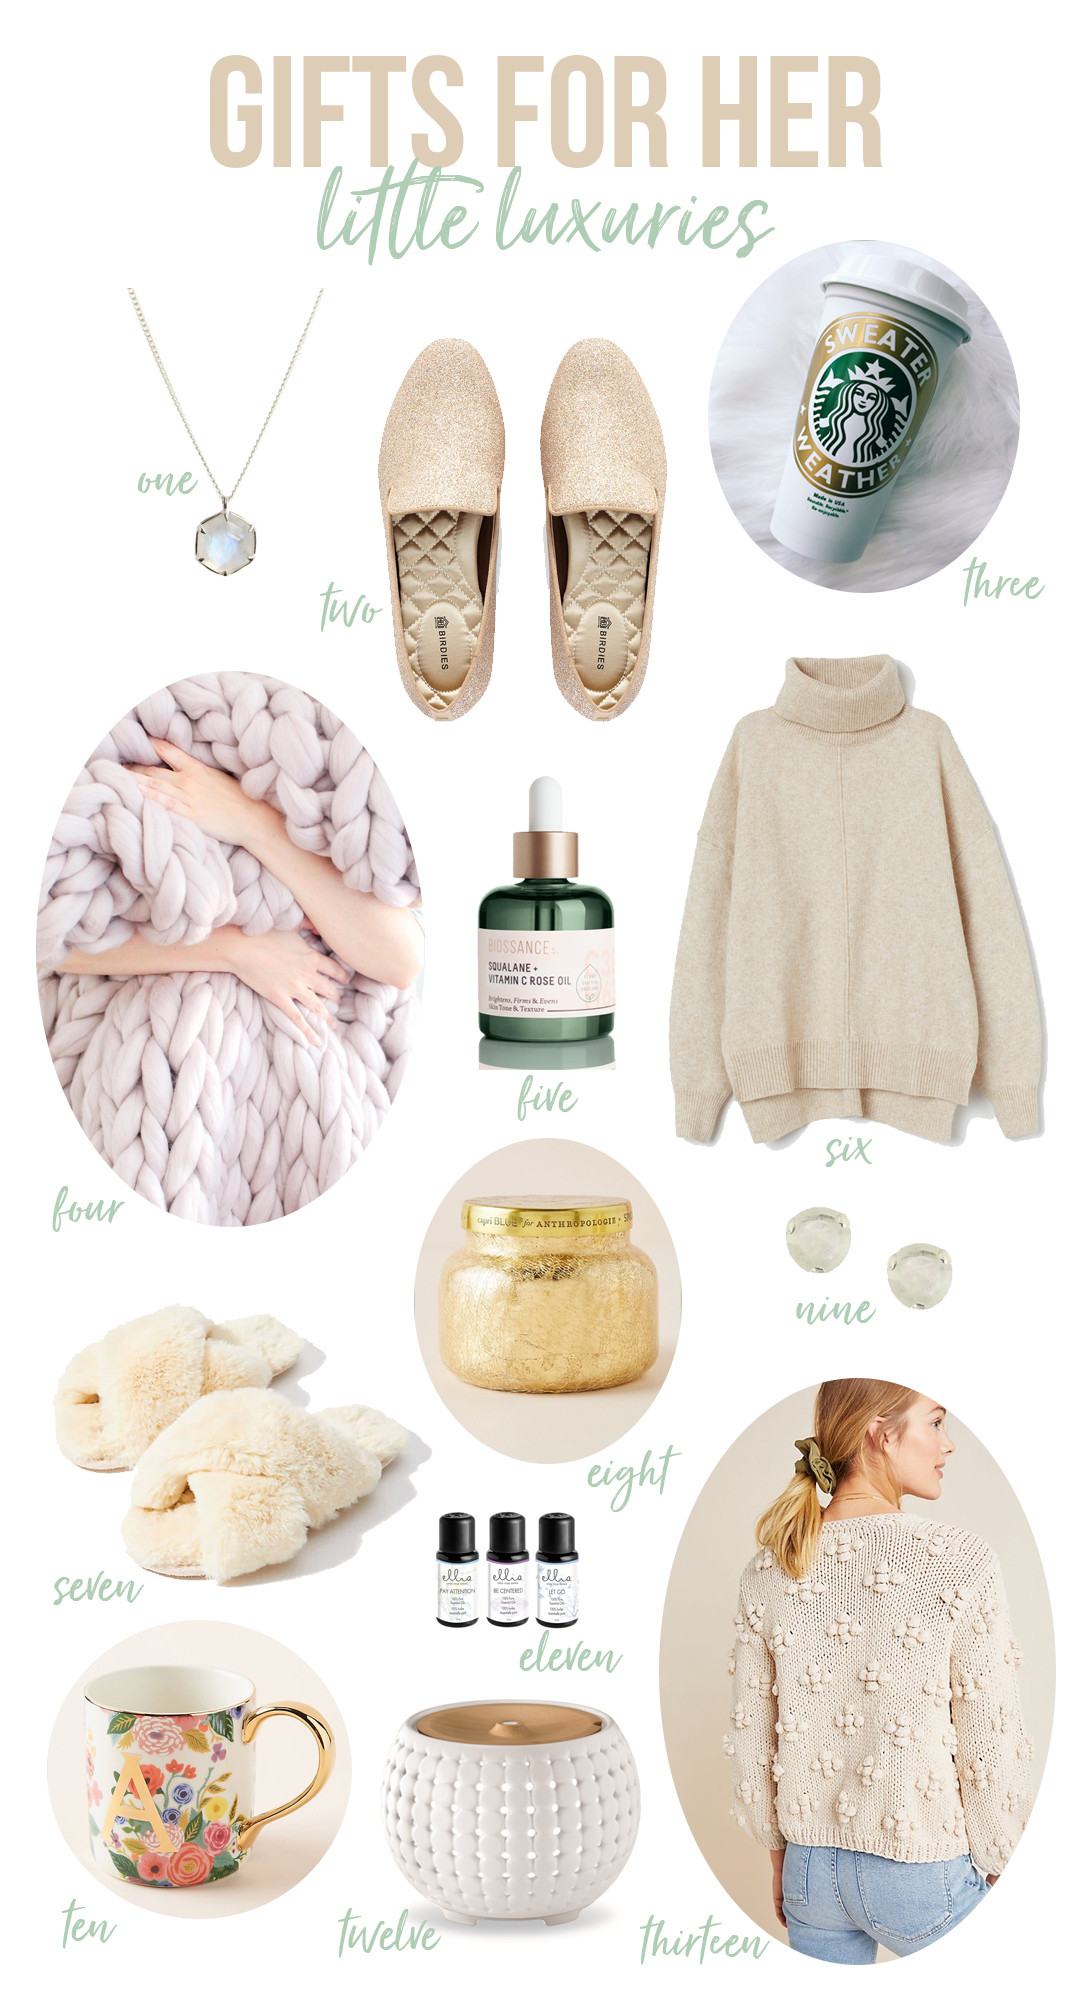 DIY Christmas Gift For Her
 2019 Gifts for Her Little Luxuries